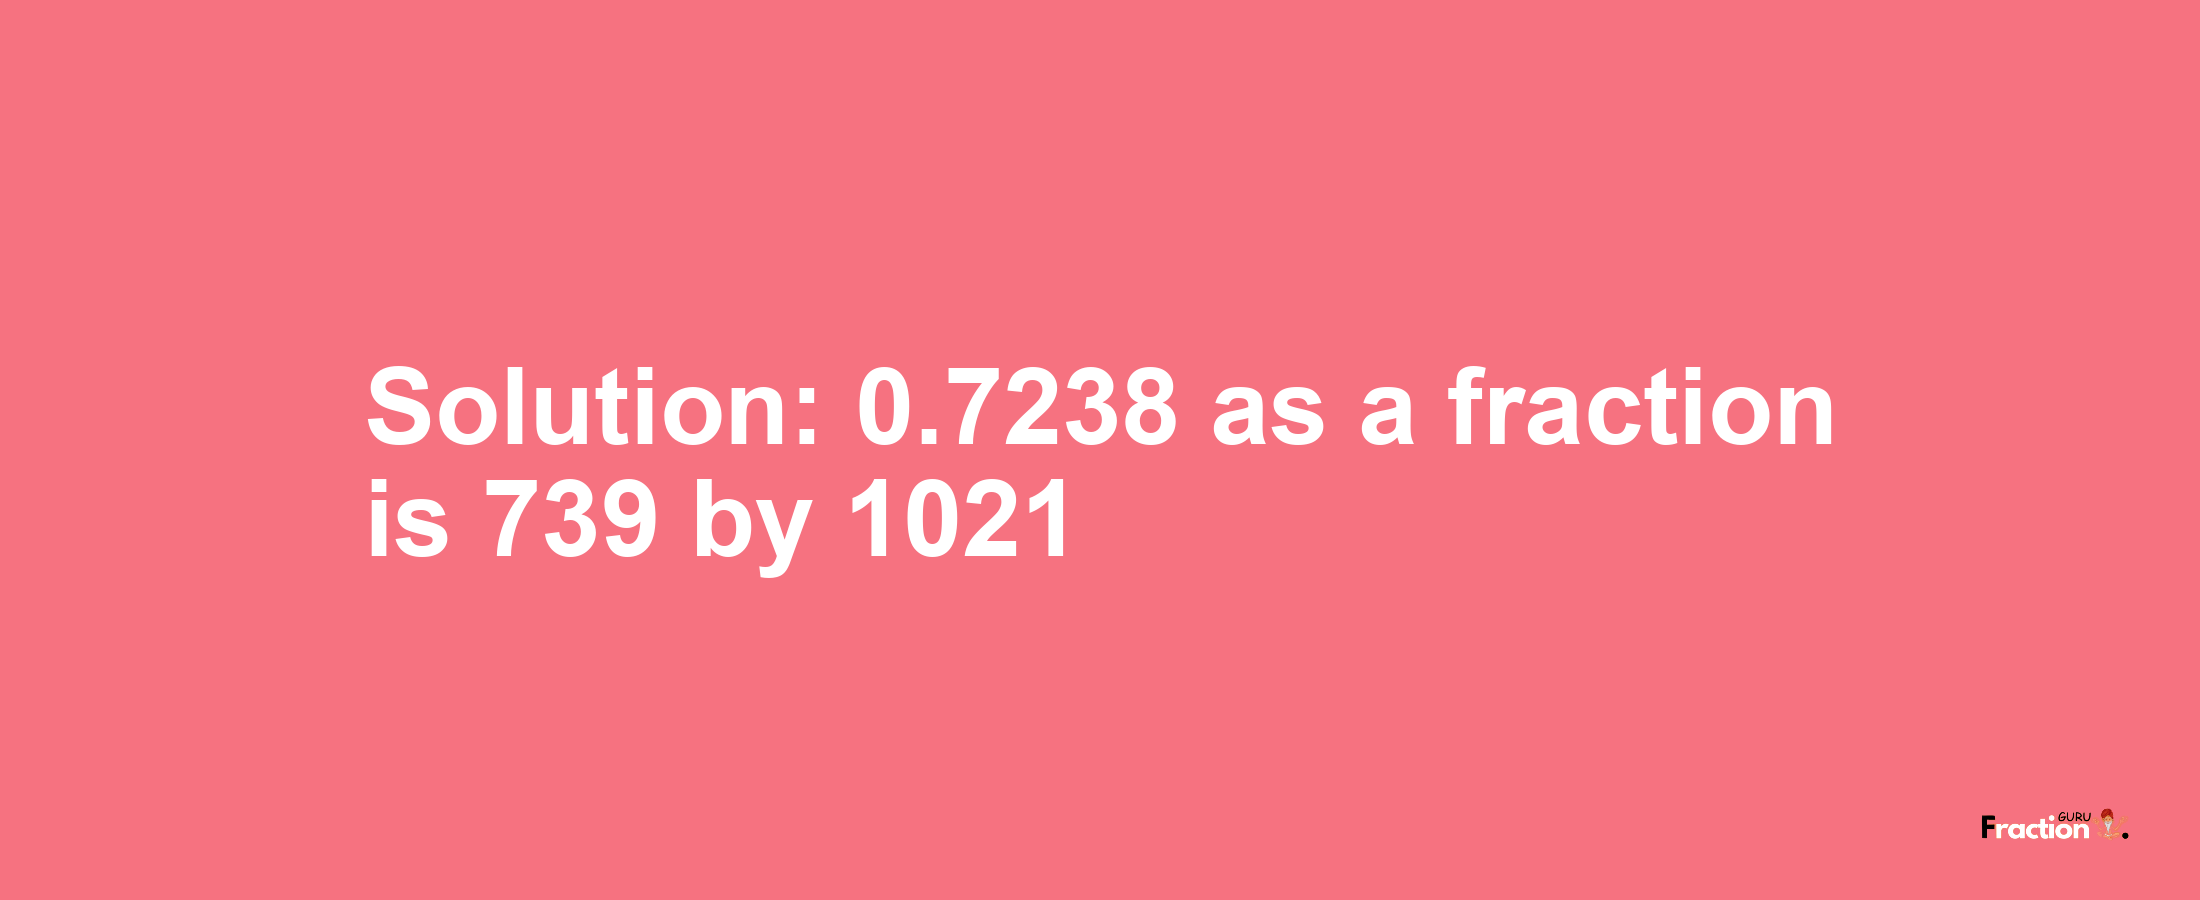 Solution:0.7238 as a fraction is 739/1021